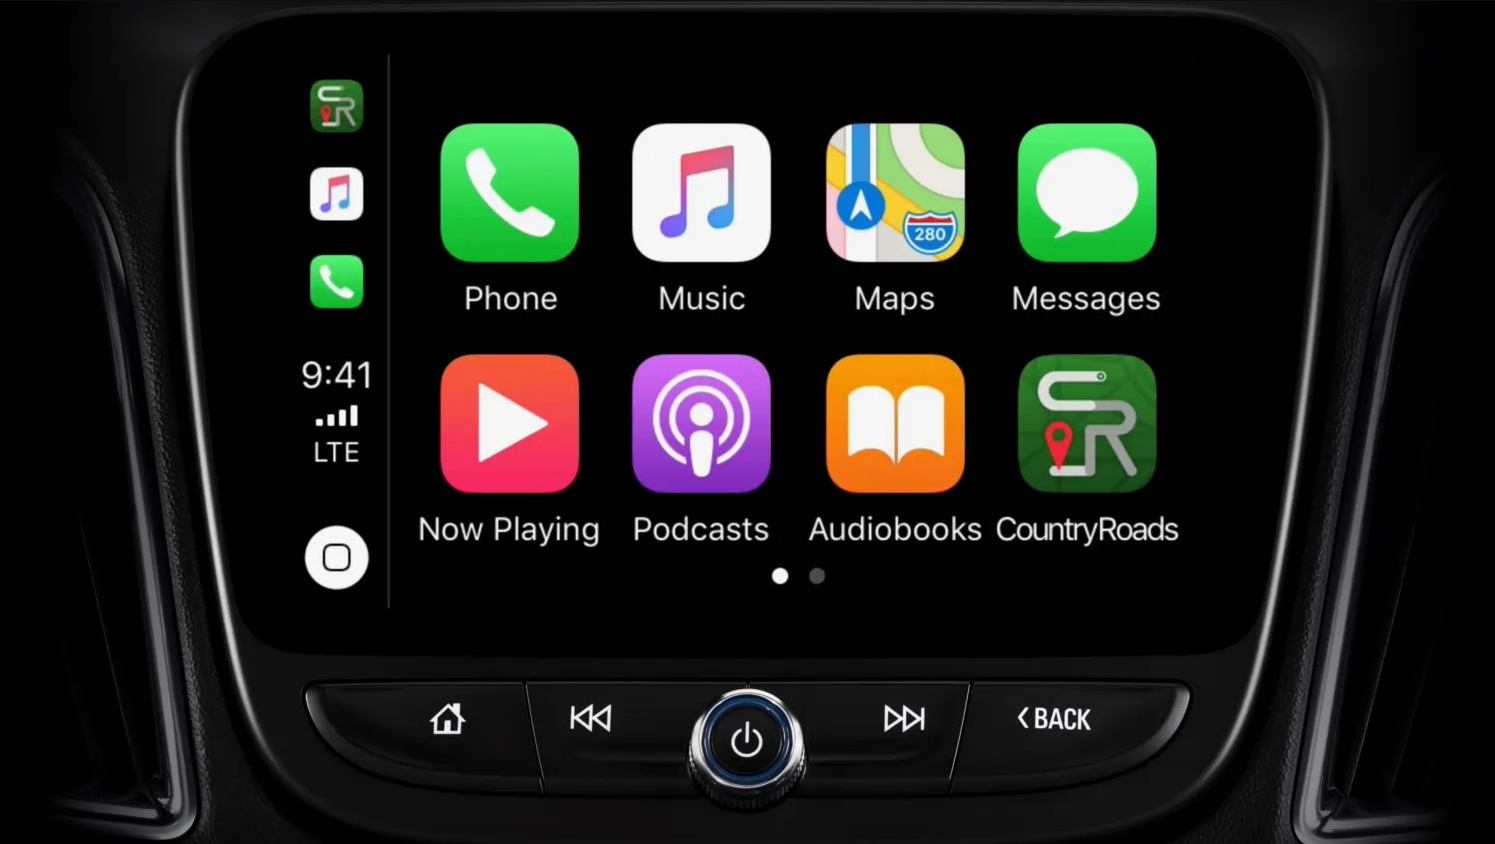 During the 2018 WWDC Conference, Apple released iOS 12 and started supporting third-party navigation systems on CarPlay.